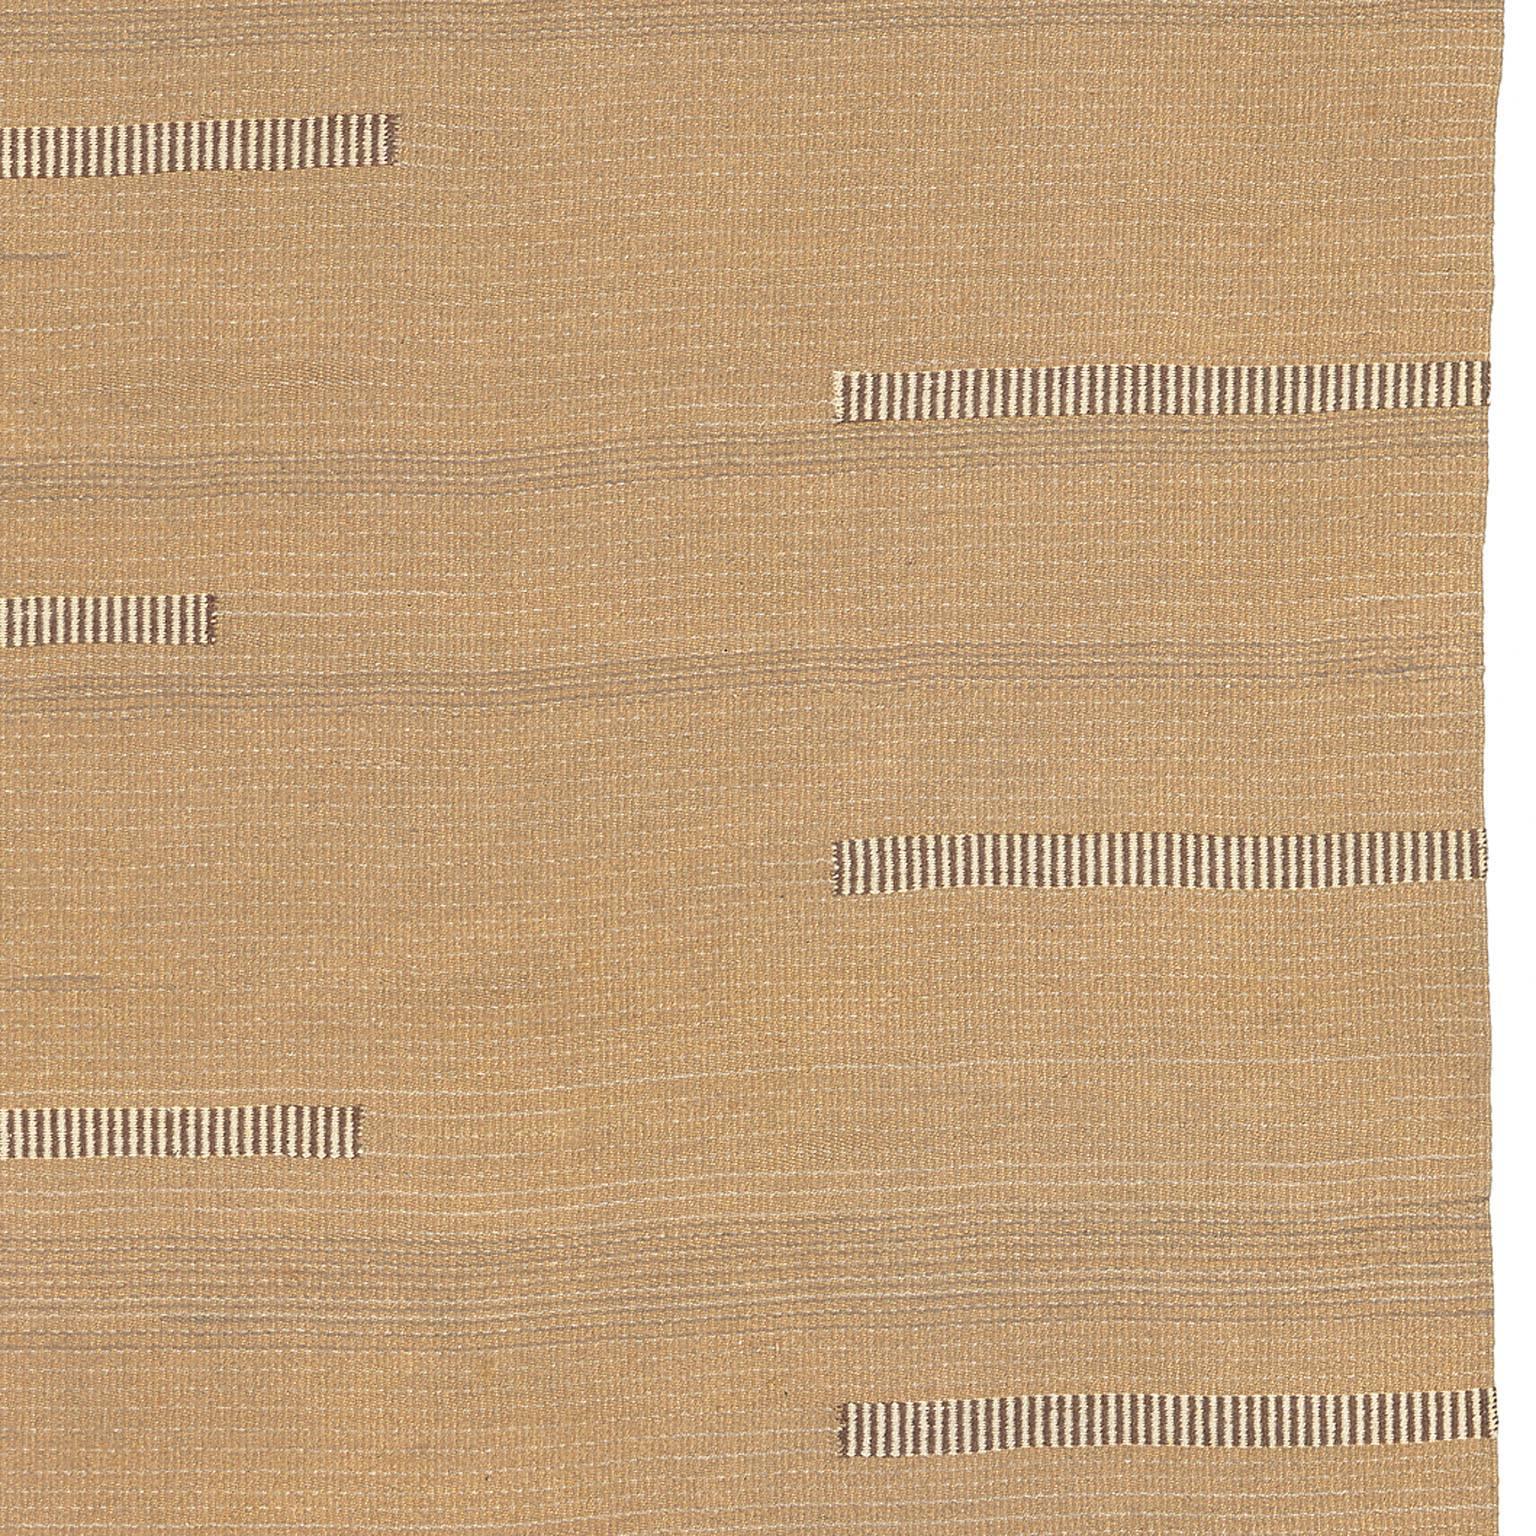 20th Century Finnish Flat-Weave Carpet In Good Condition For Sale In New York, NY